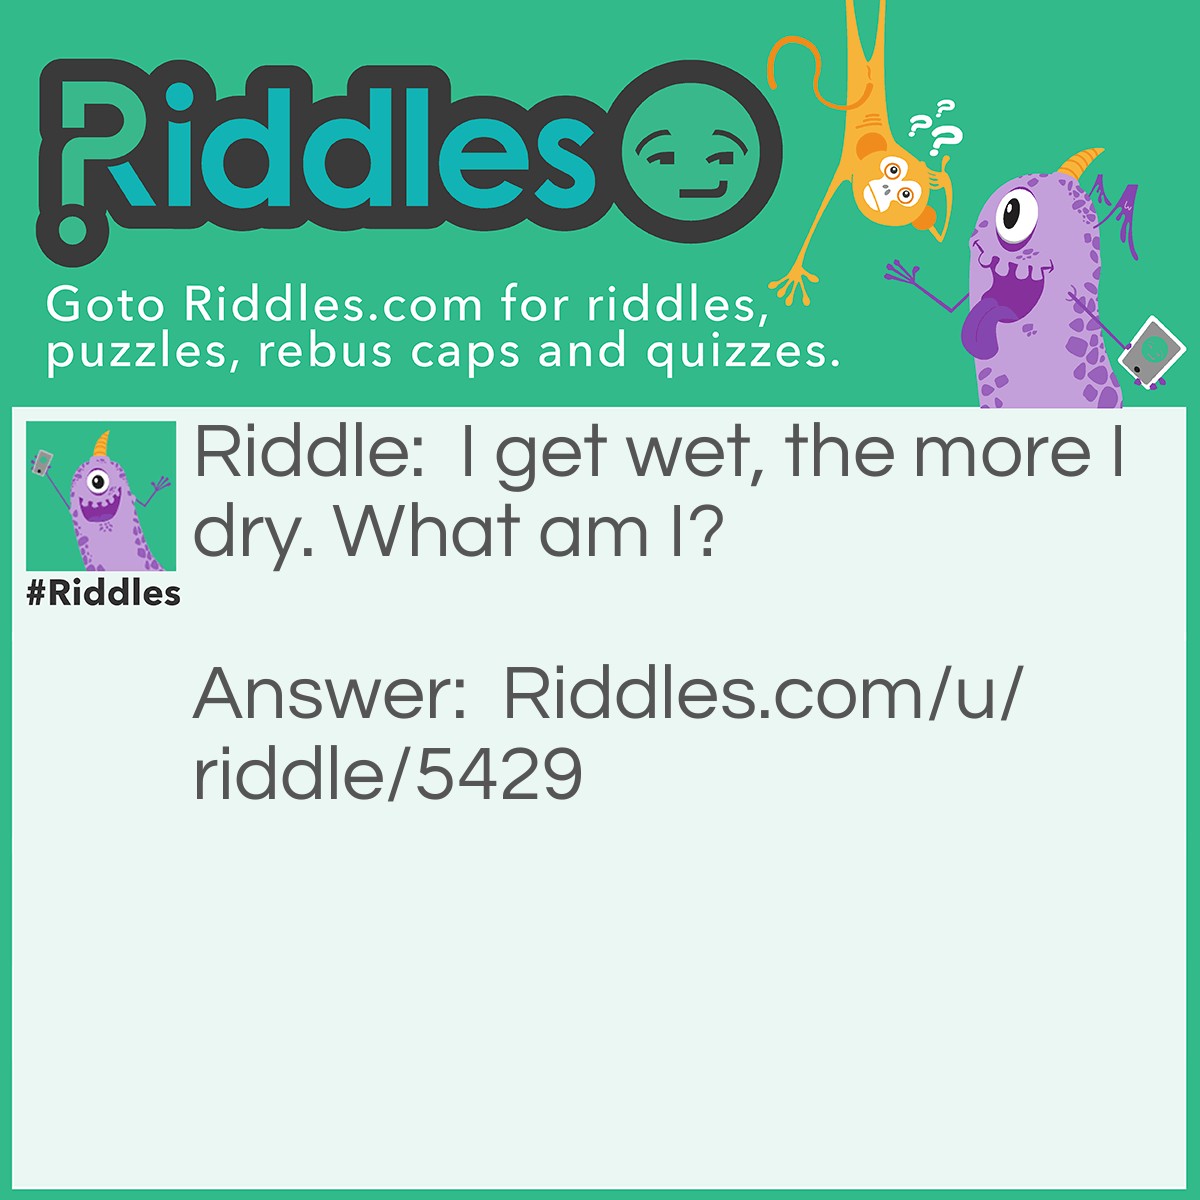 Riddle: I get wet, the more I dry. What am I? Answer: A towel.